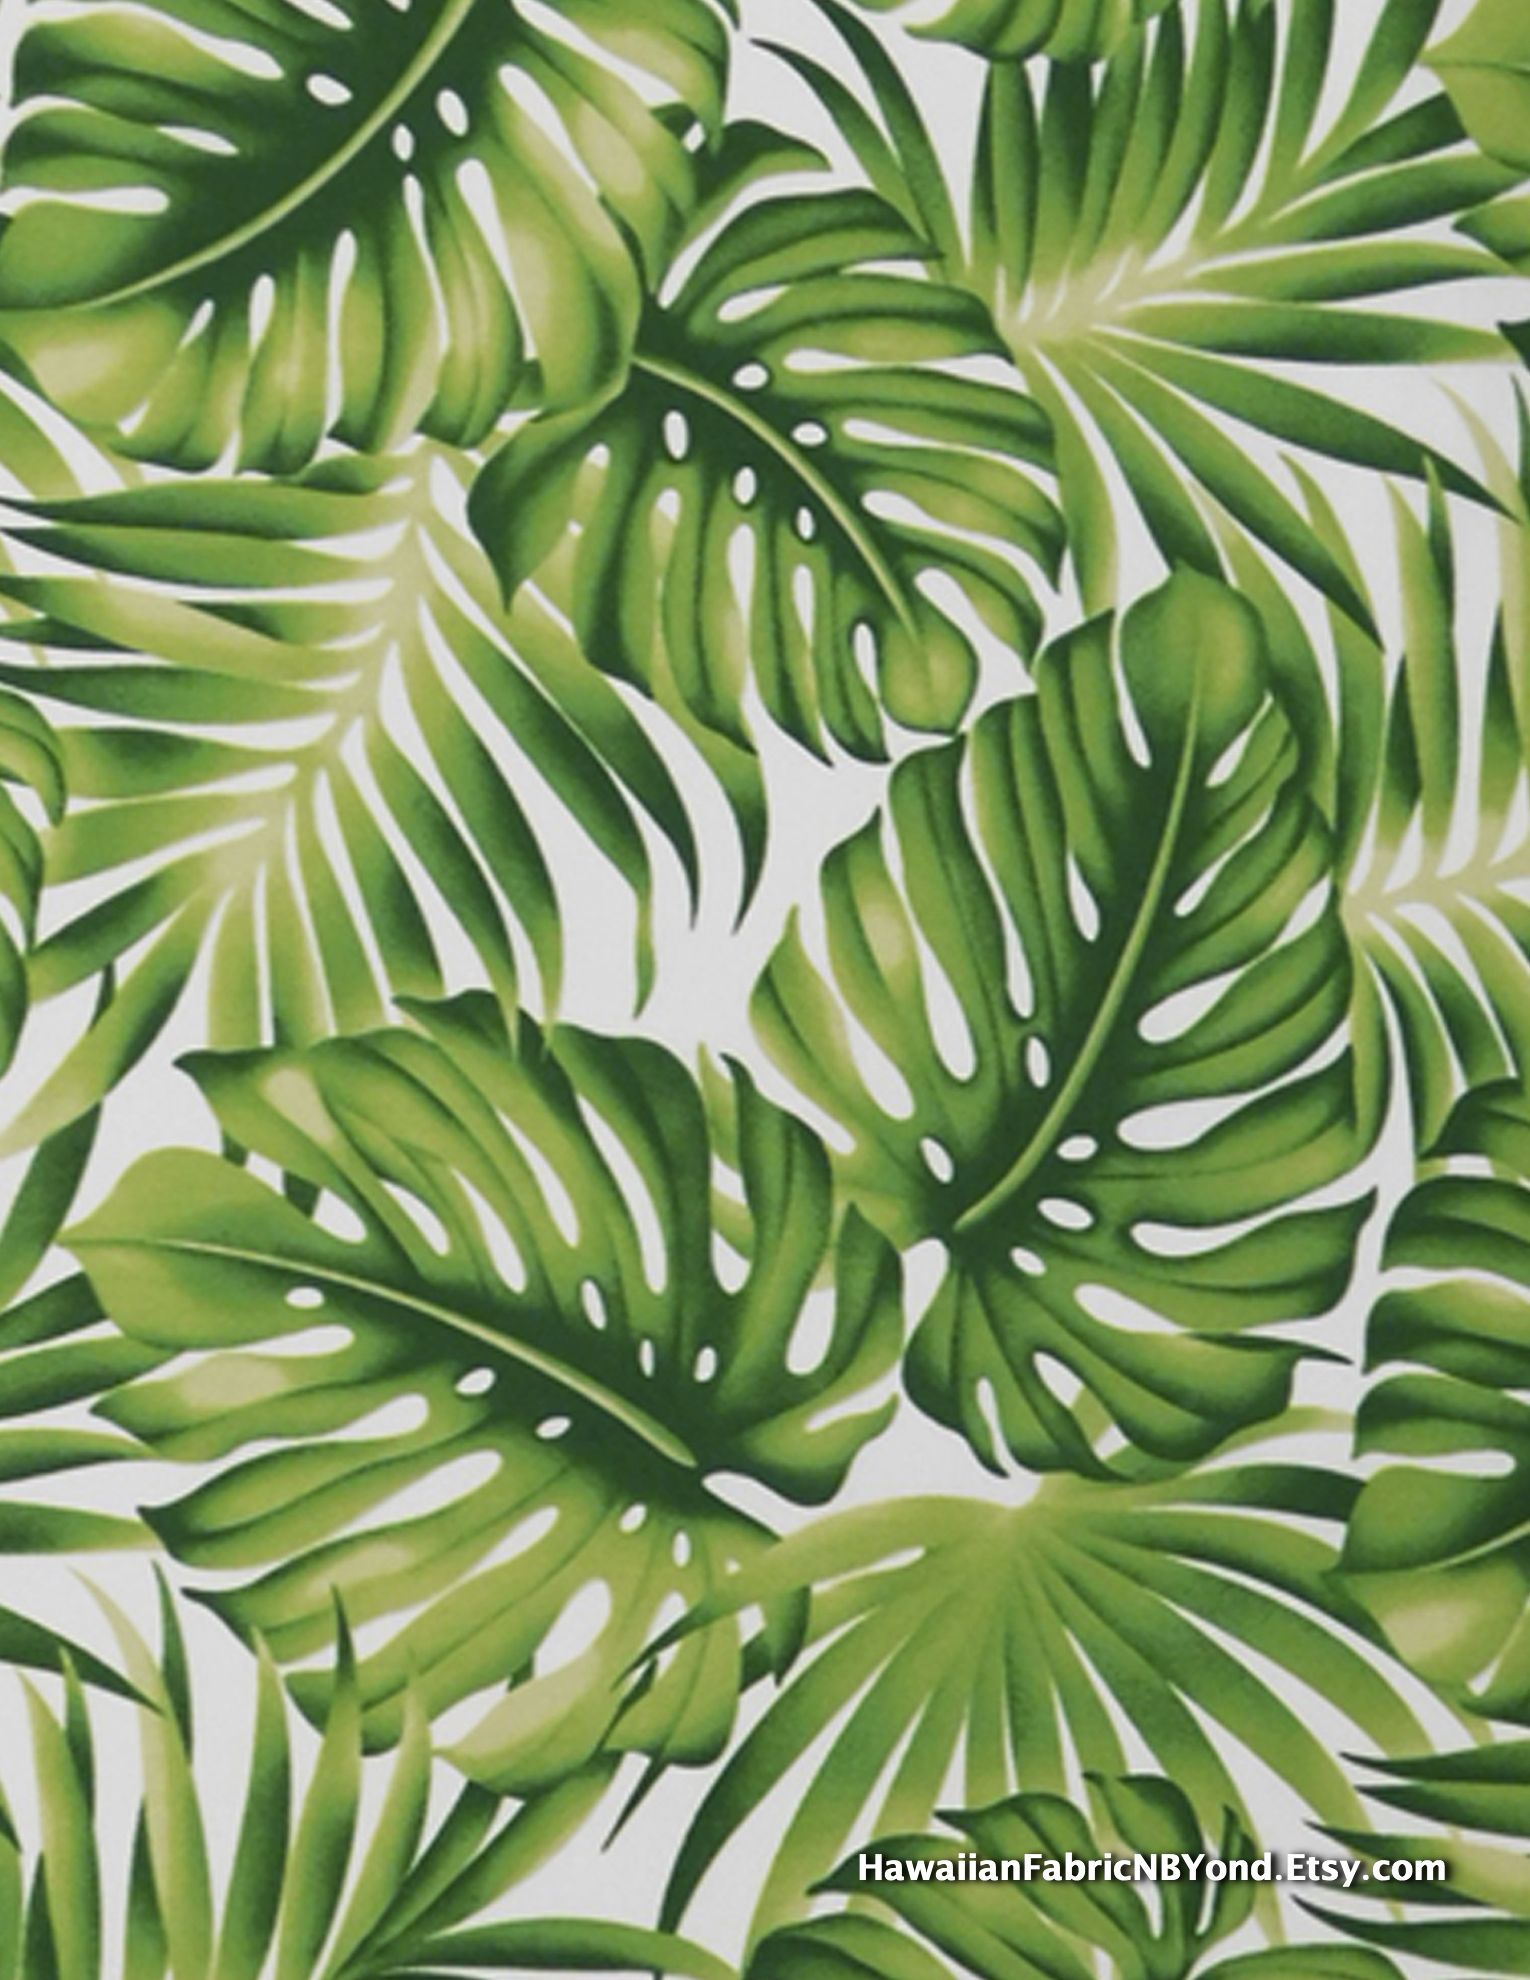 Tropical fabric: monstera leaves and palm fronds. By HawaiianFabricNBYond a shop at Etsy.com. Tropical art print, Tropical art, Plant wallpaper